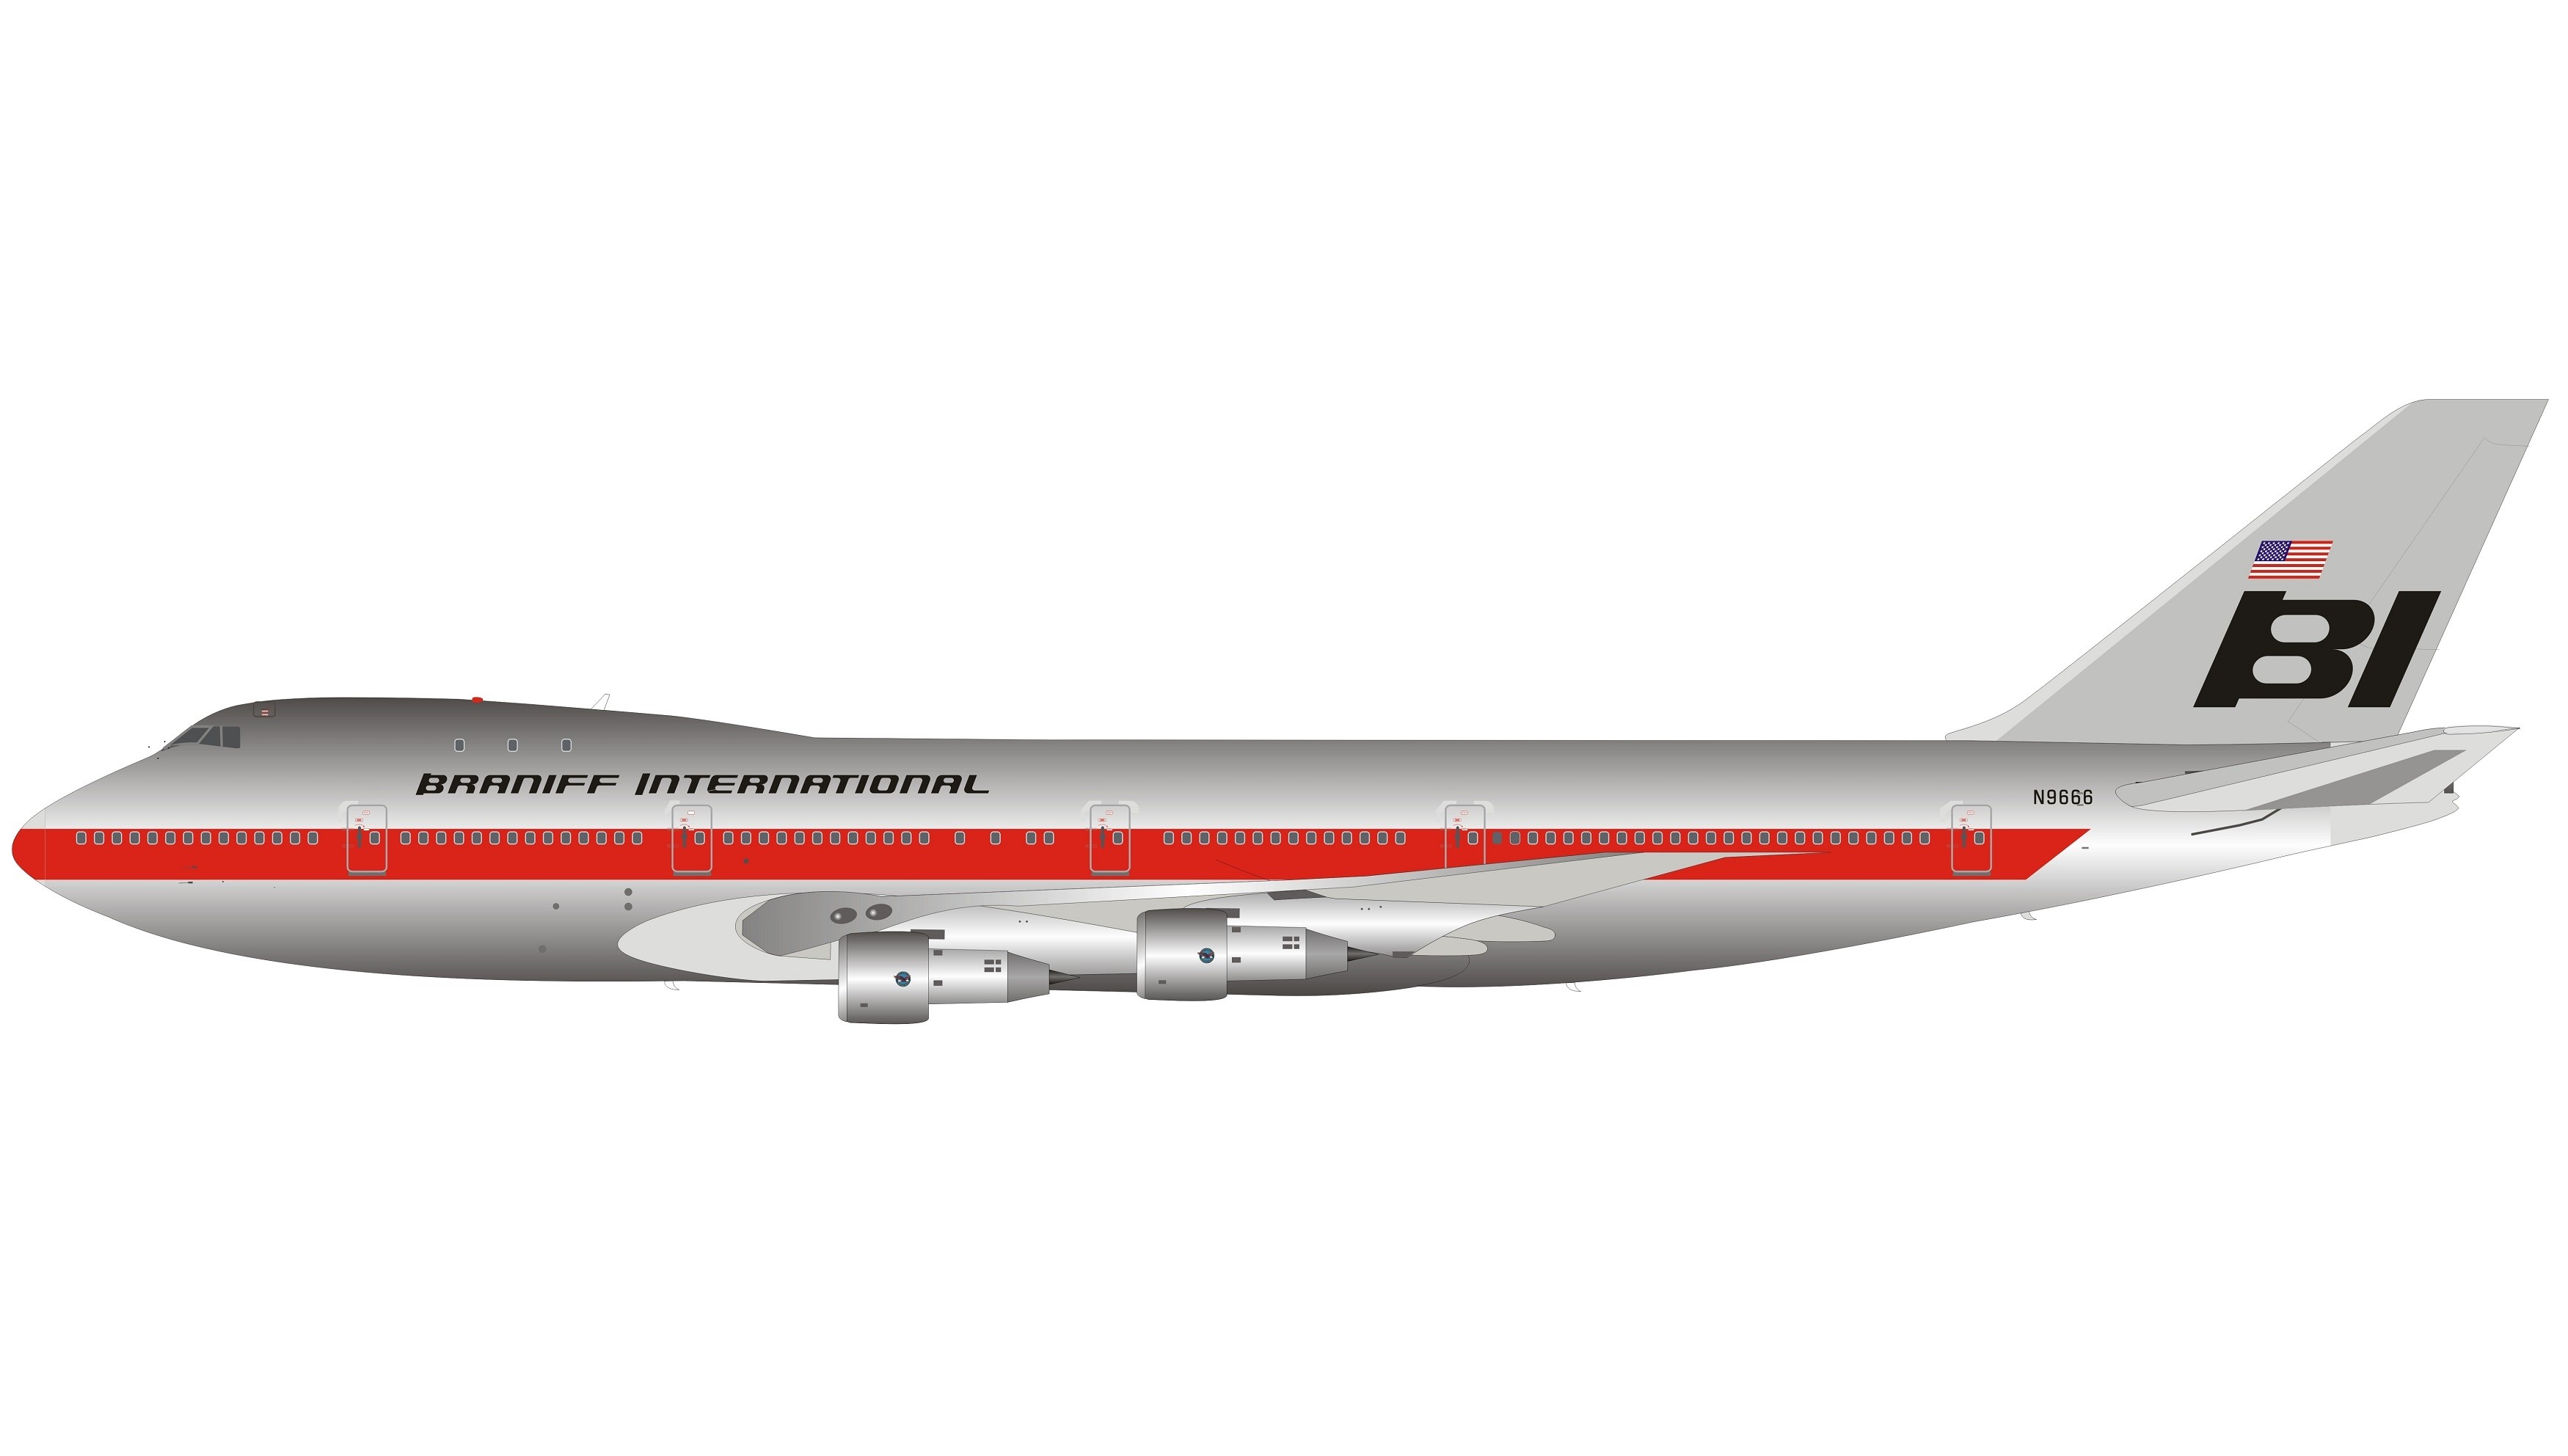 Braniff International Boeing 747 100 N9666 Polished Inflight If741bn1218p Scale 1 200